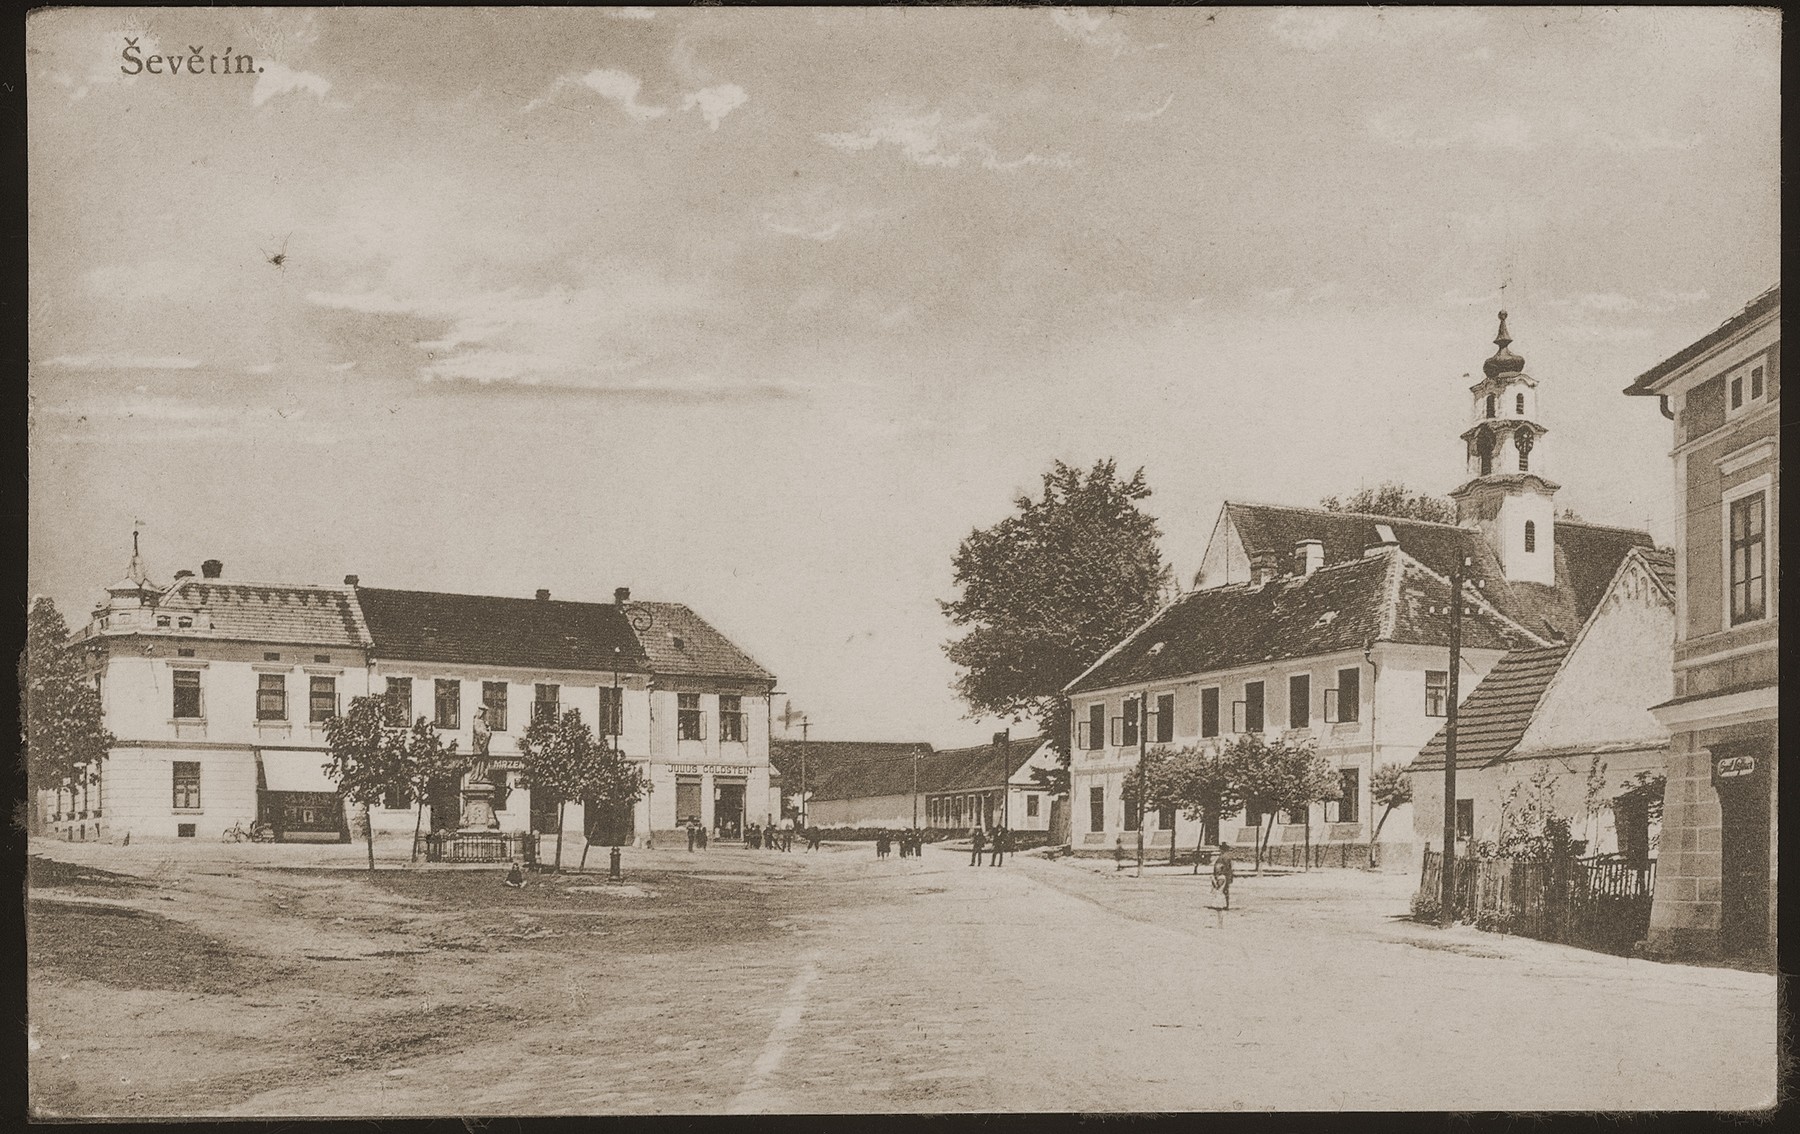 Picture postcard of the market square in Sevetin, Czechoslovakia.  

Julius Goldstein's general store is visible at the center left.